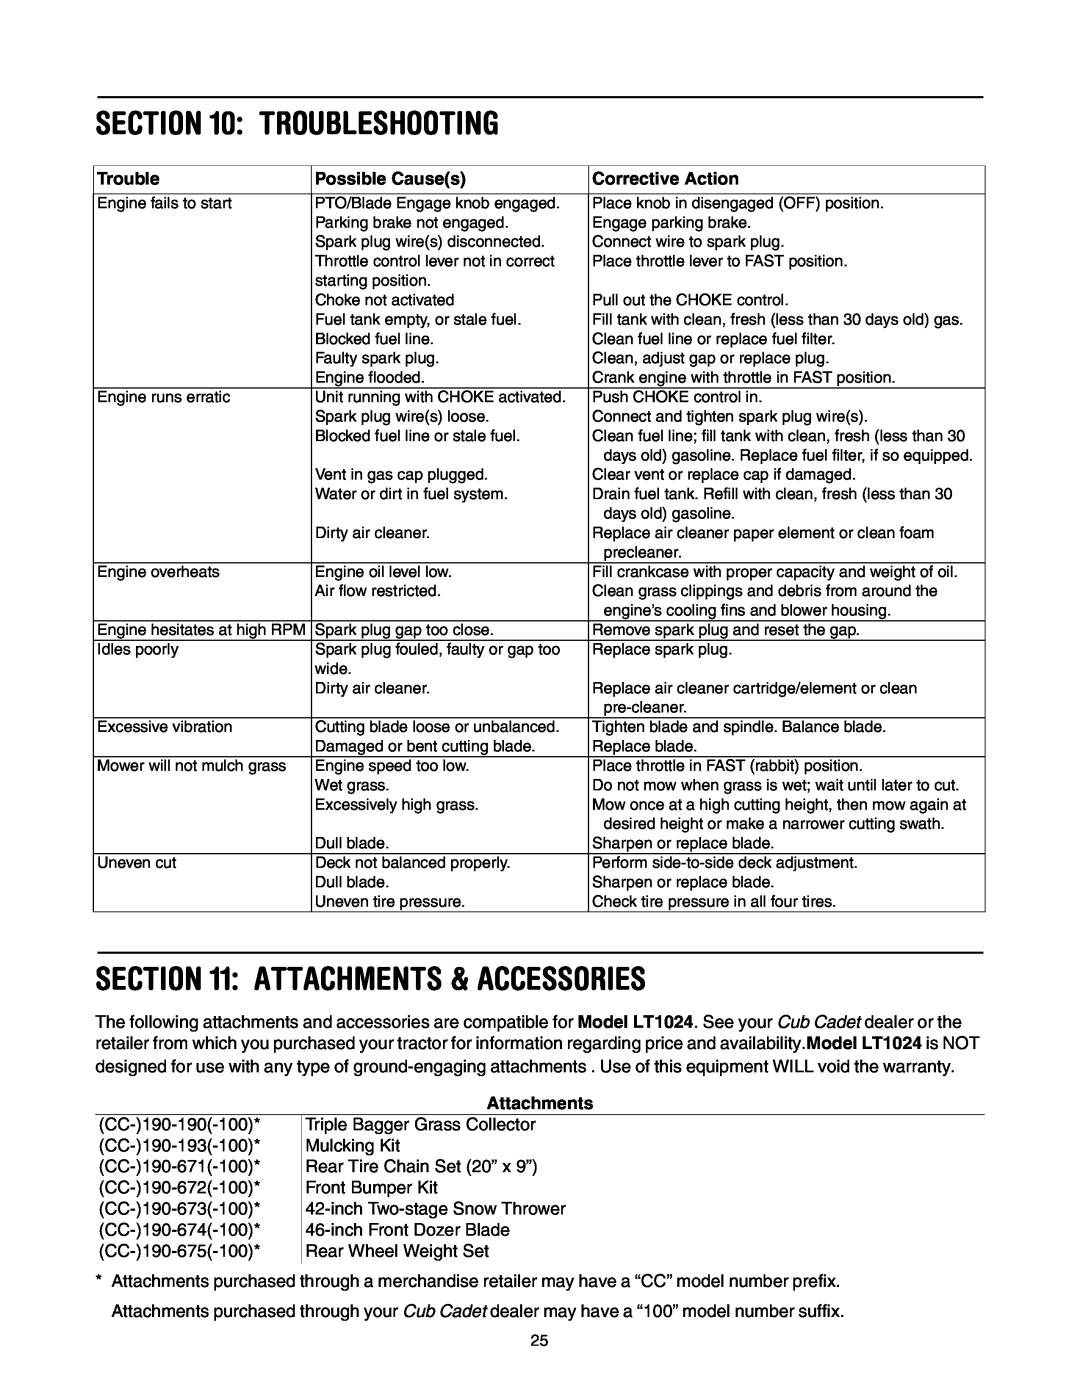 Bolens LT1024 manual Troubleshooting, Attachments & Accessories, Possible Causes, Corrective Action 